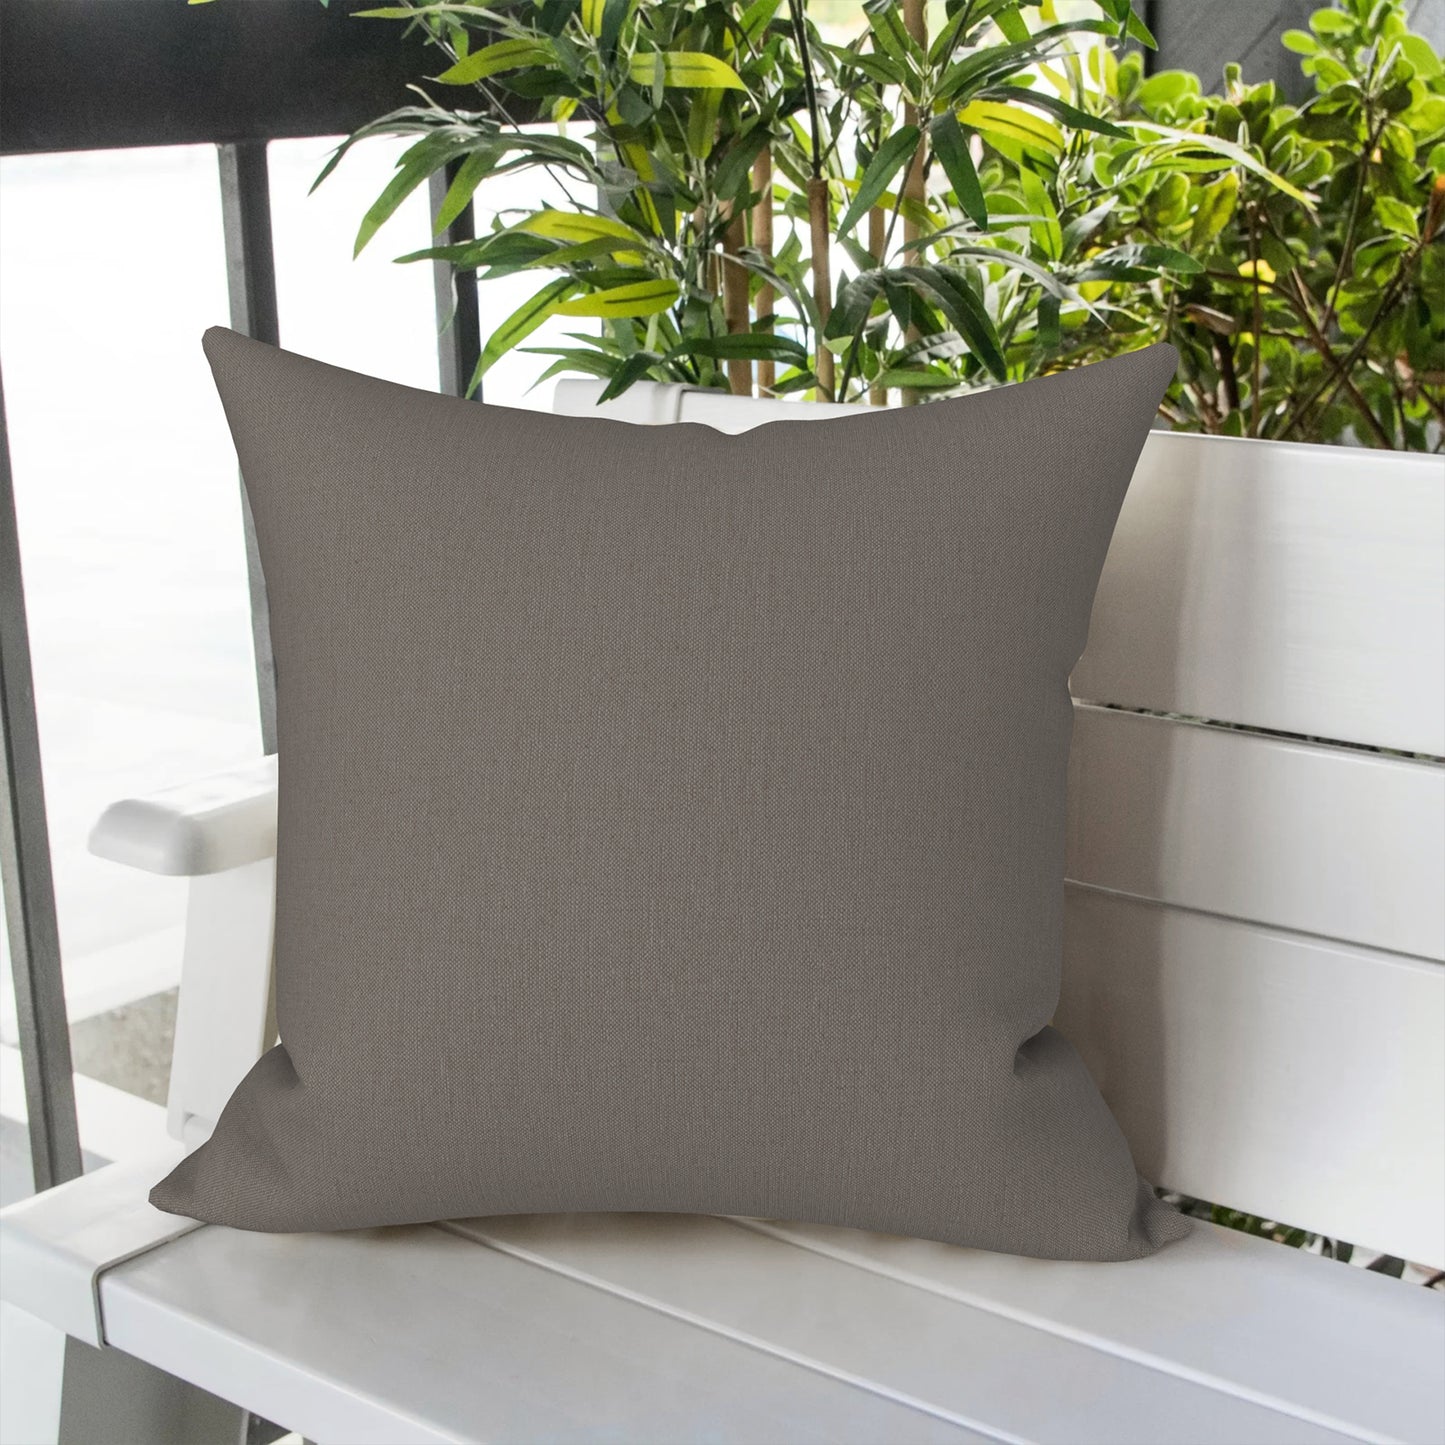 Melody Elephant Outdoor Throw Pillow Covers Pack of 2, Decorative Water Repellent Square Pillow Cases 18x18 Inch, Patio Pillowcases for Home Patio Furniture Use, Dark Grey